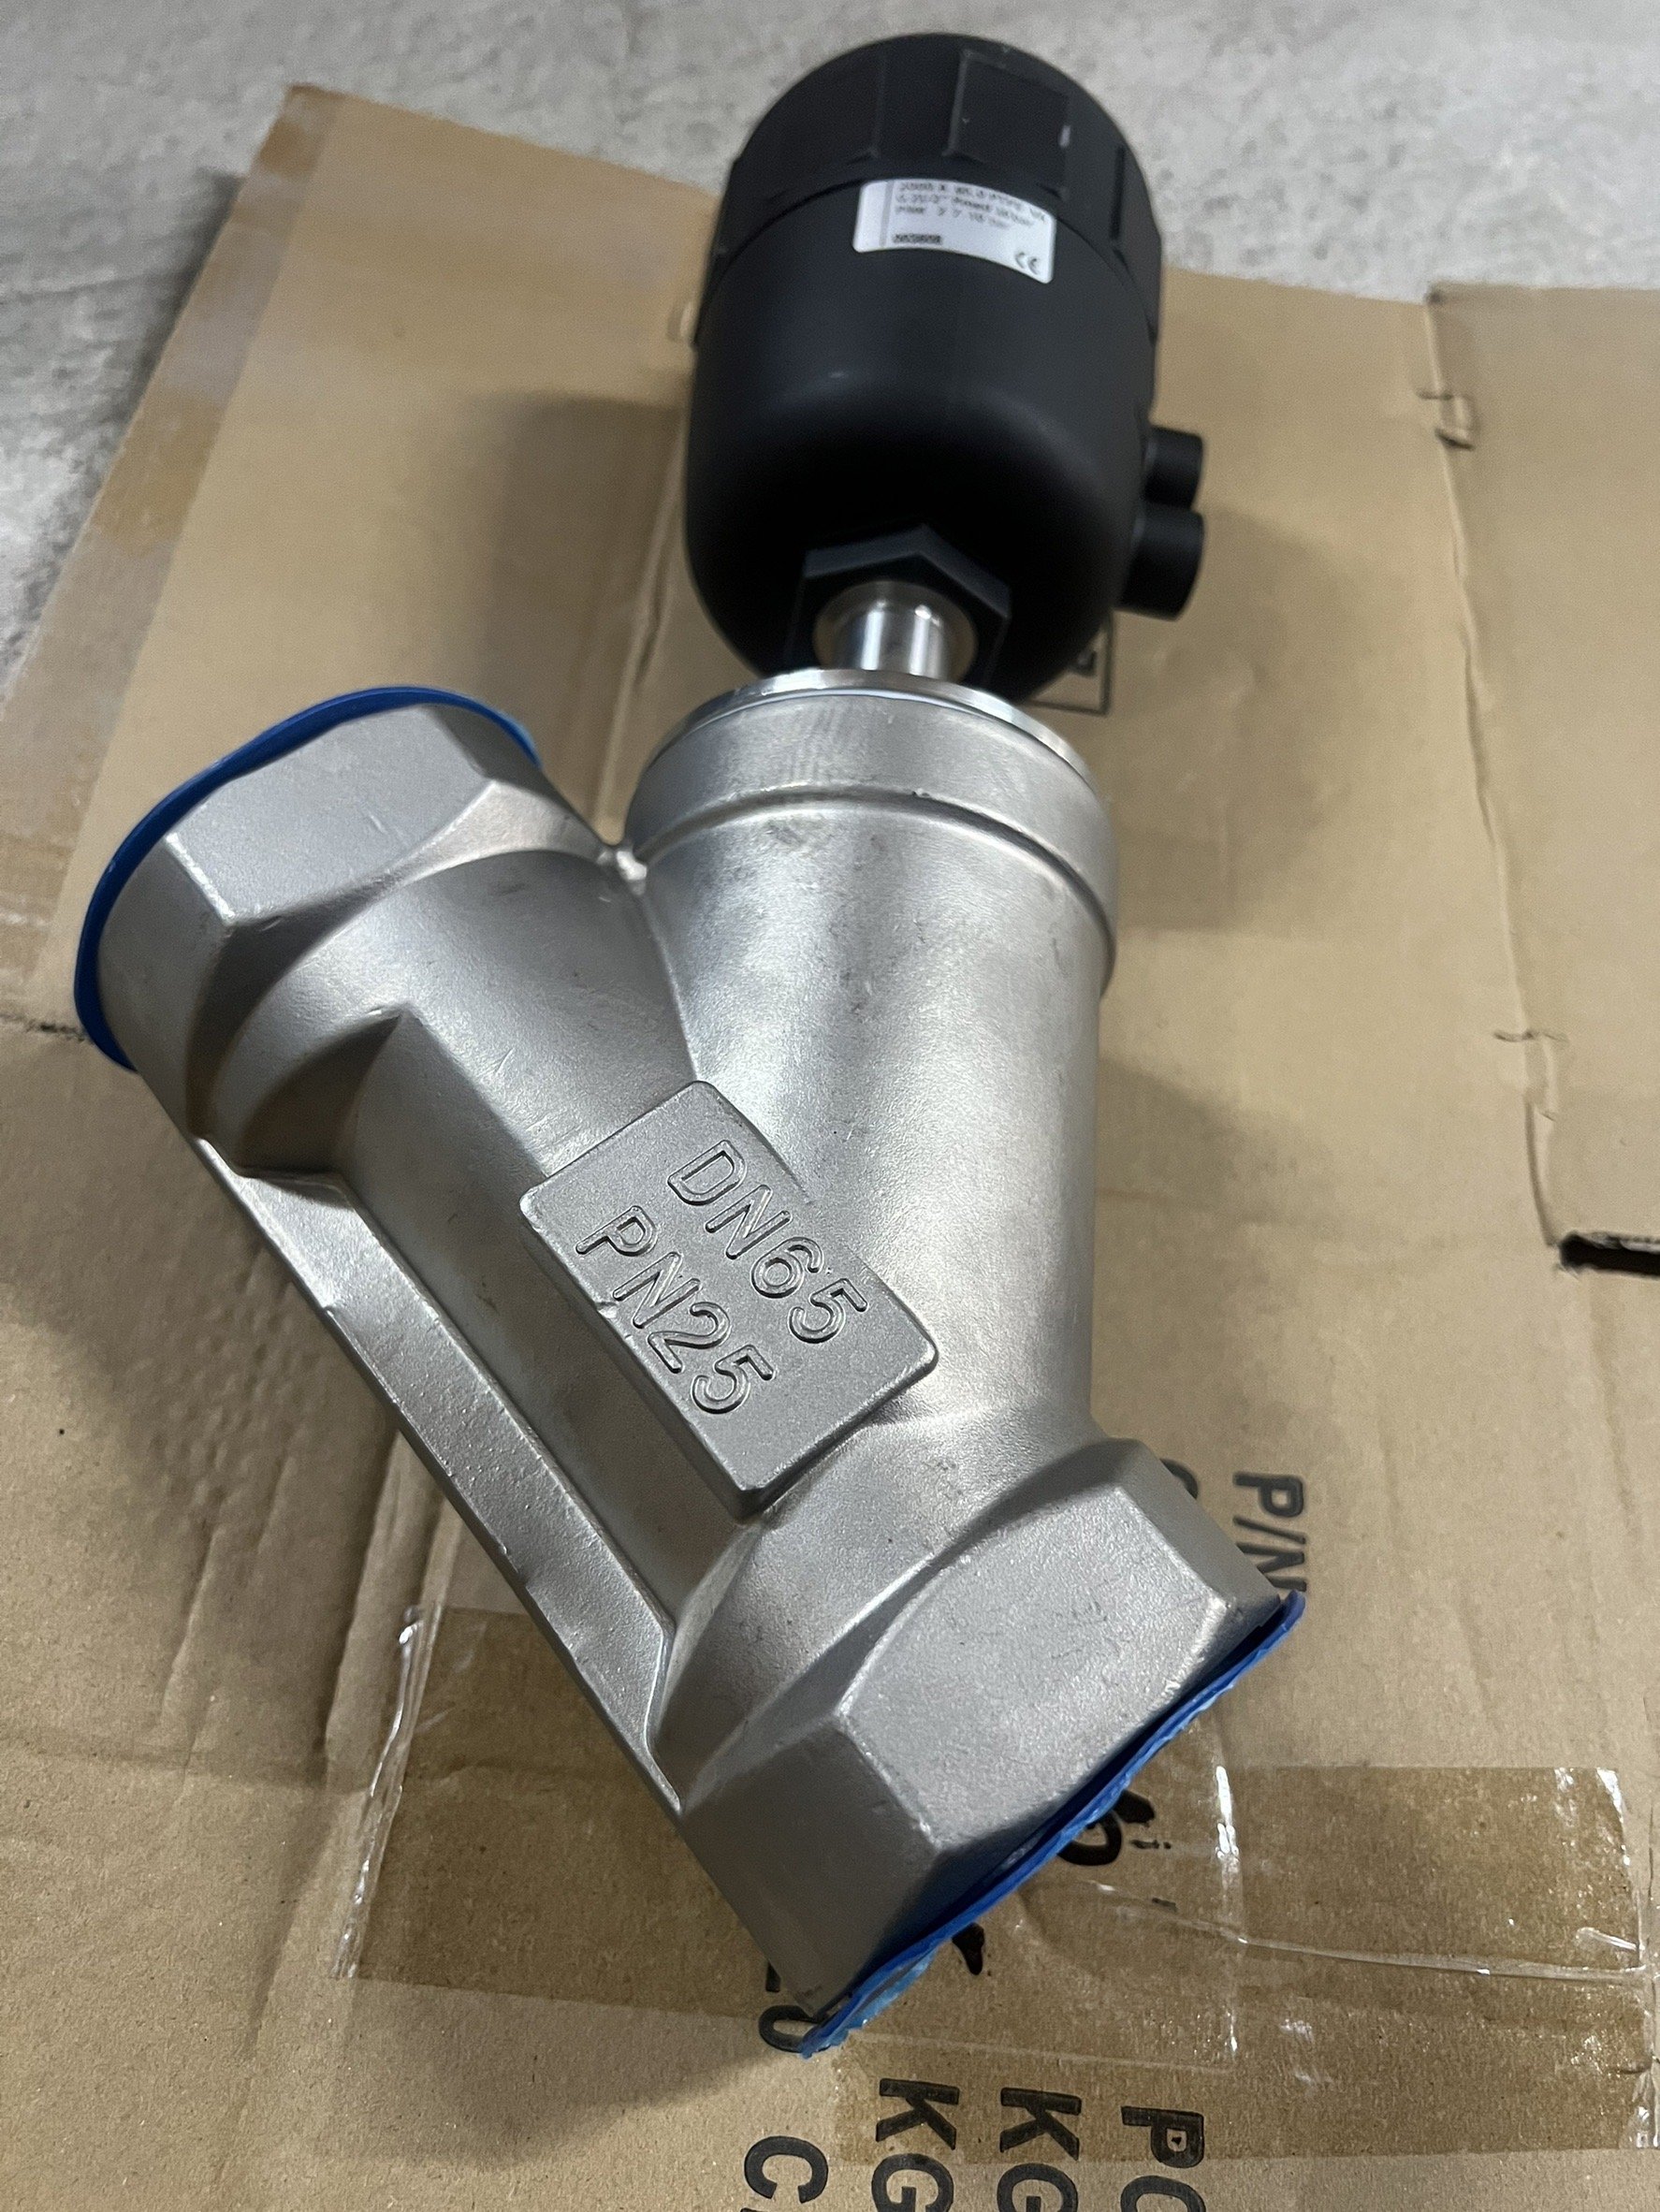 Stainless Steel Angle Seat Valve DN65 2 1/2"